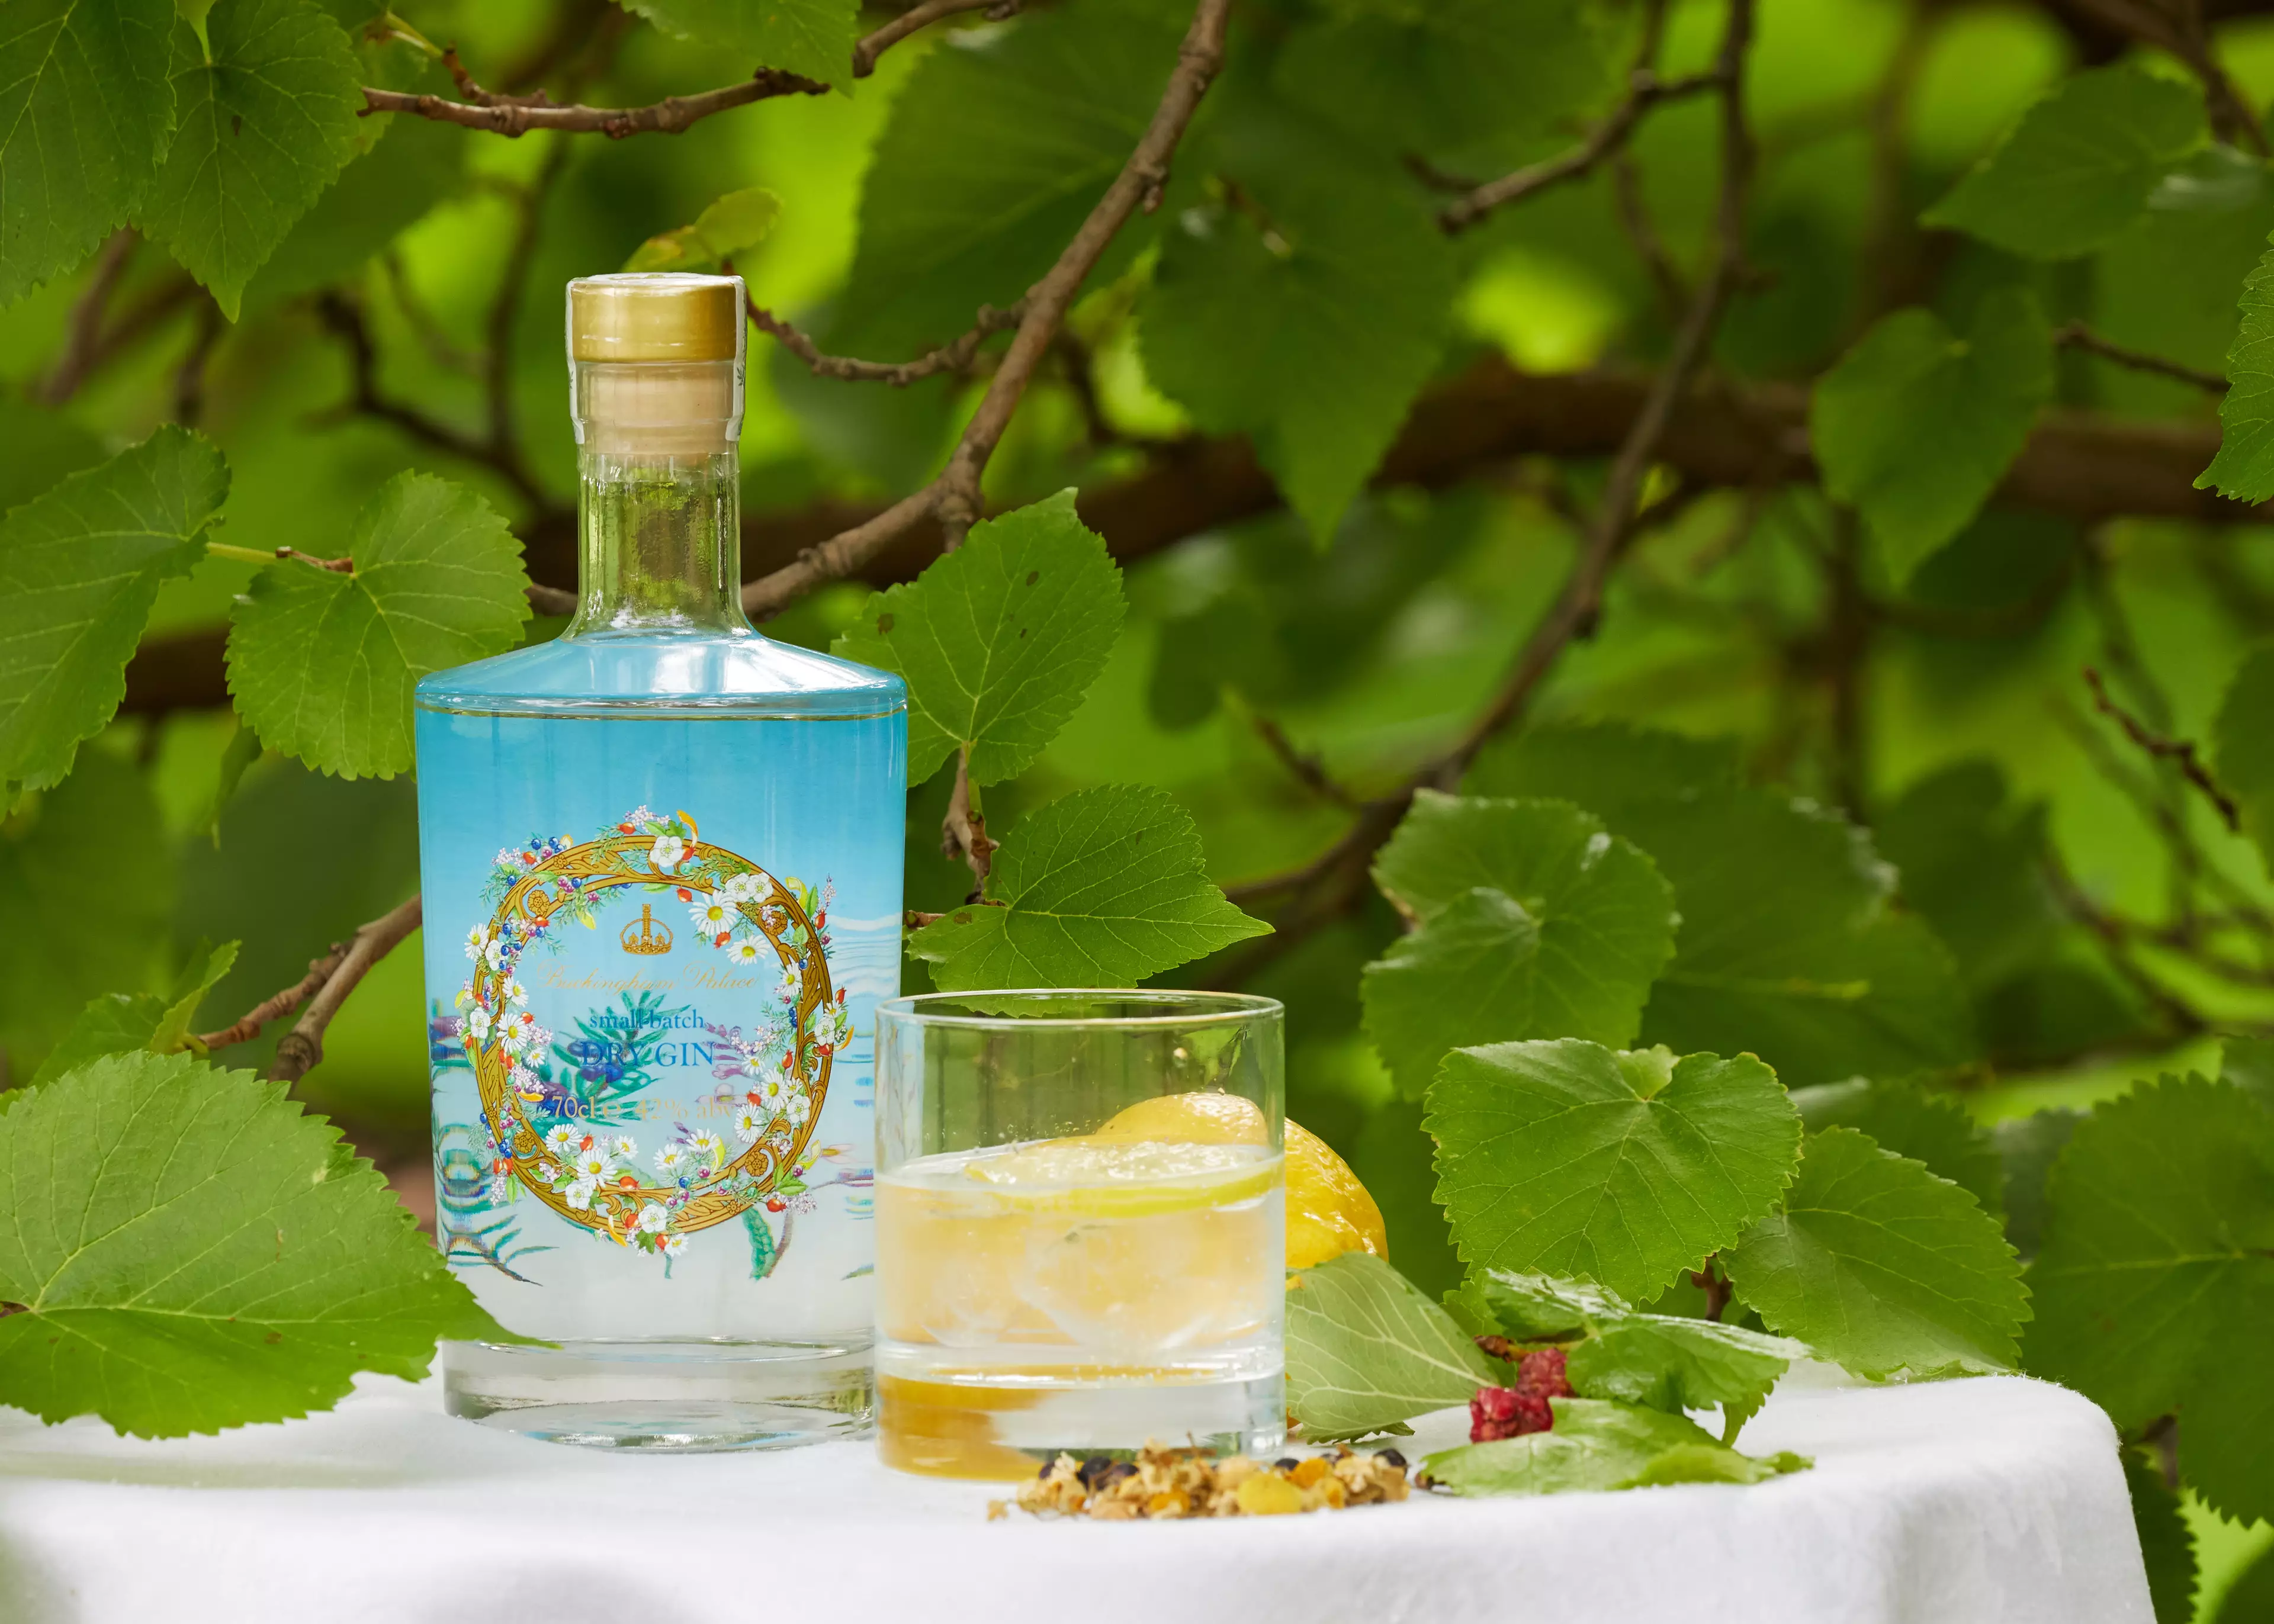 The 42% abv gin will also be sold at The Royal Collection Trust shops and served at official events at the Palace (